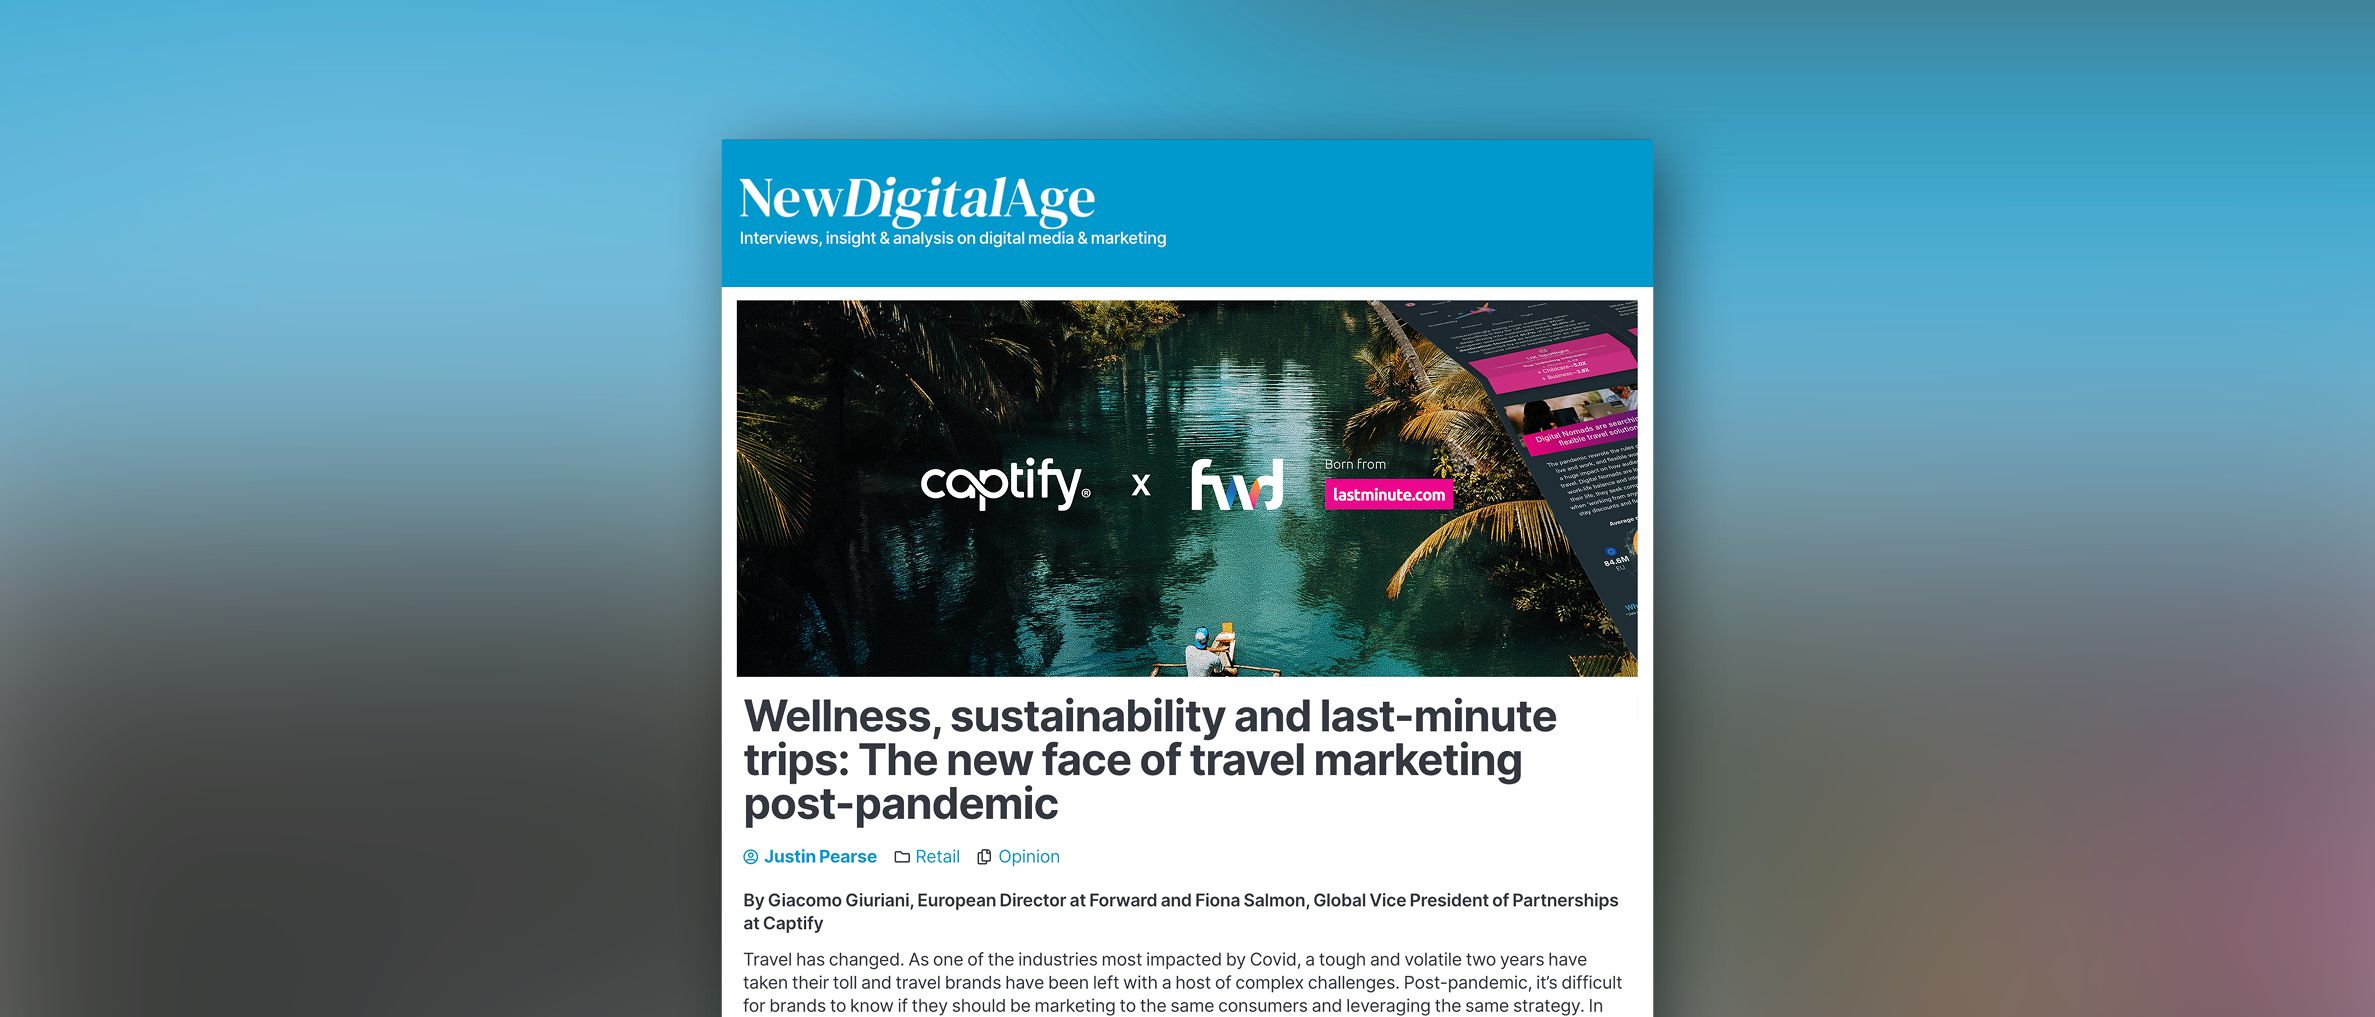 NewDigitalAge: Wellness, Sustainability and Last-minute Trips—The New Face of Travel Marketing Post-pandemic